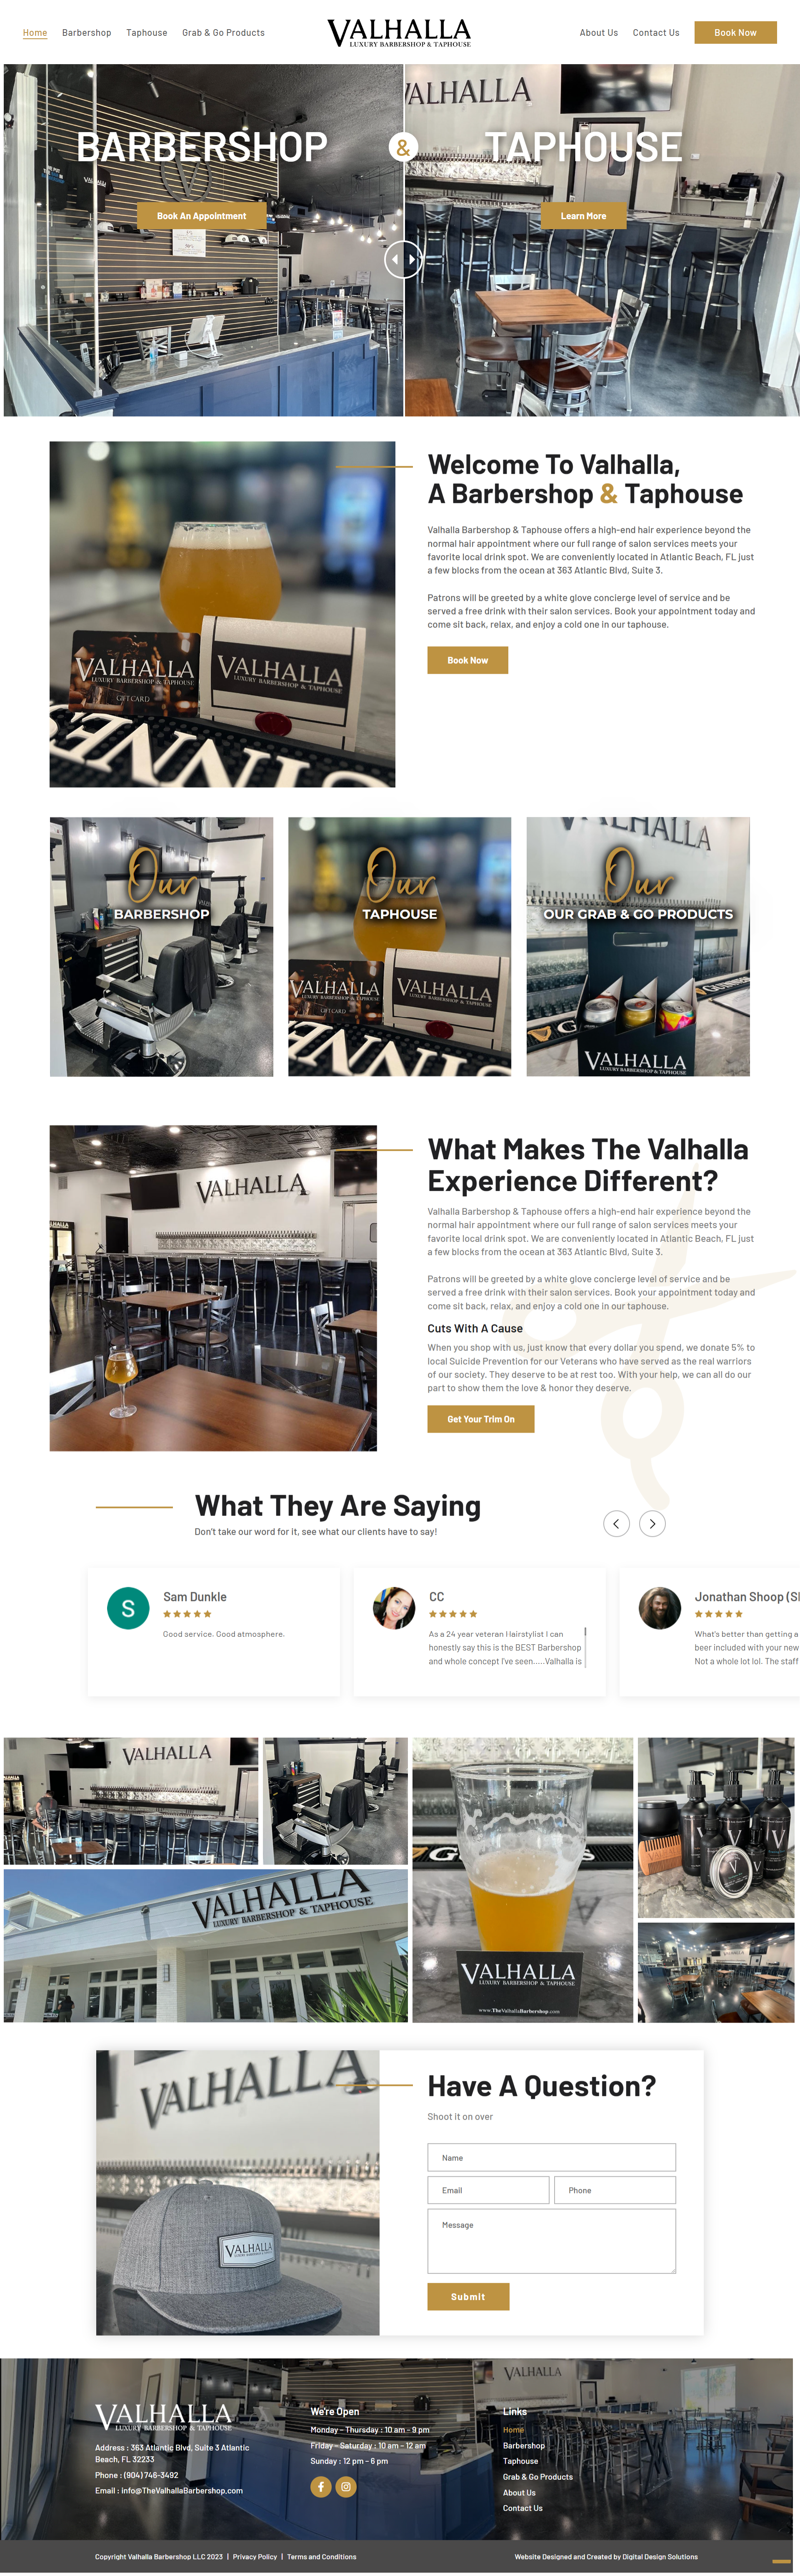 The Valhalla Barbershop & Taphouse - After